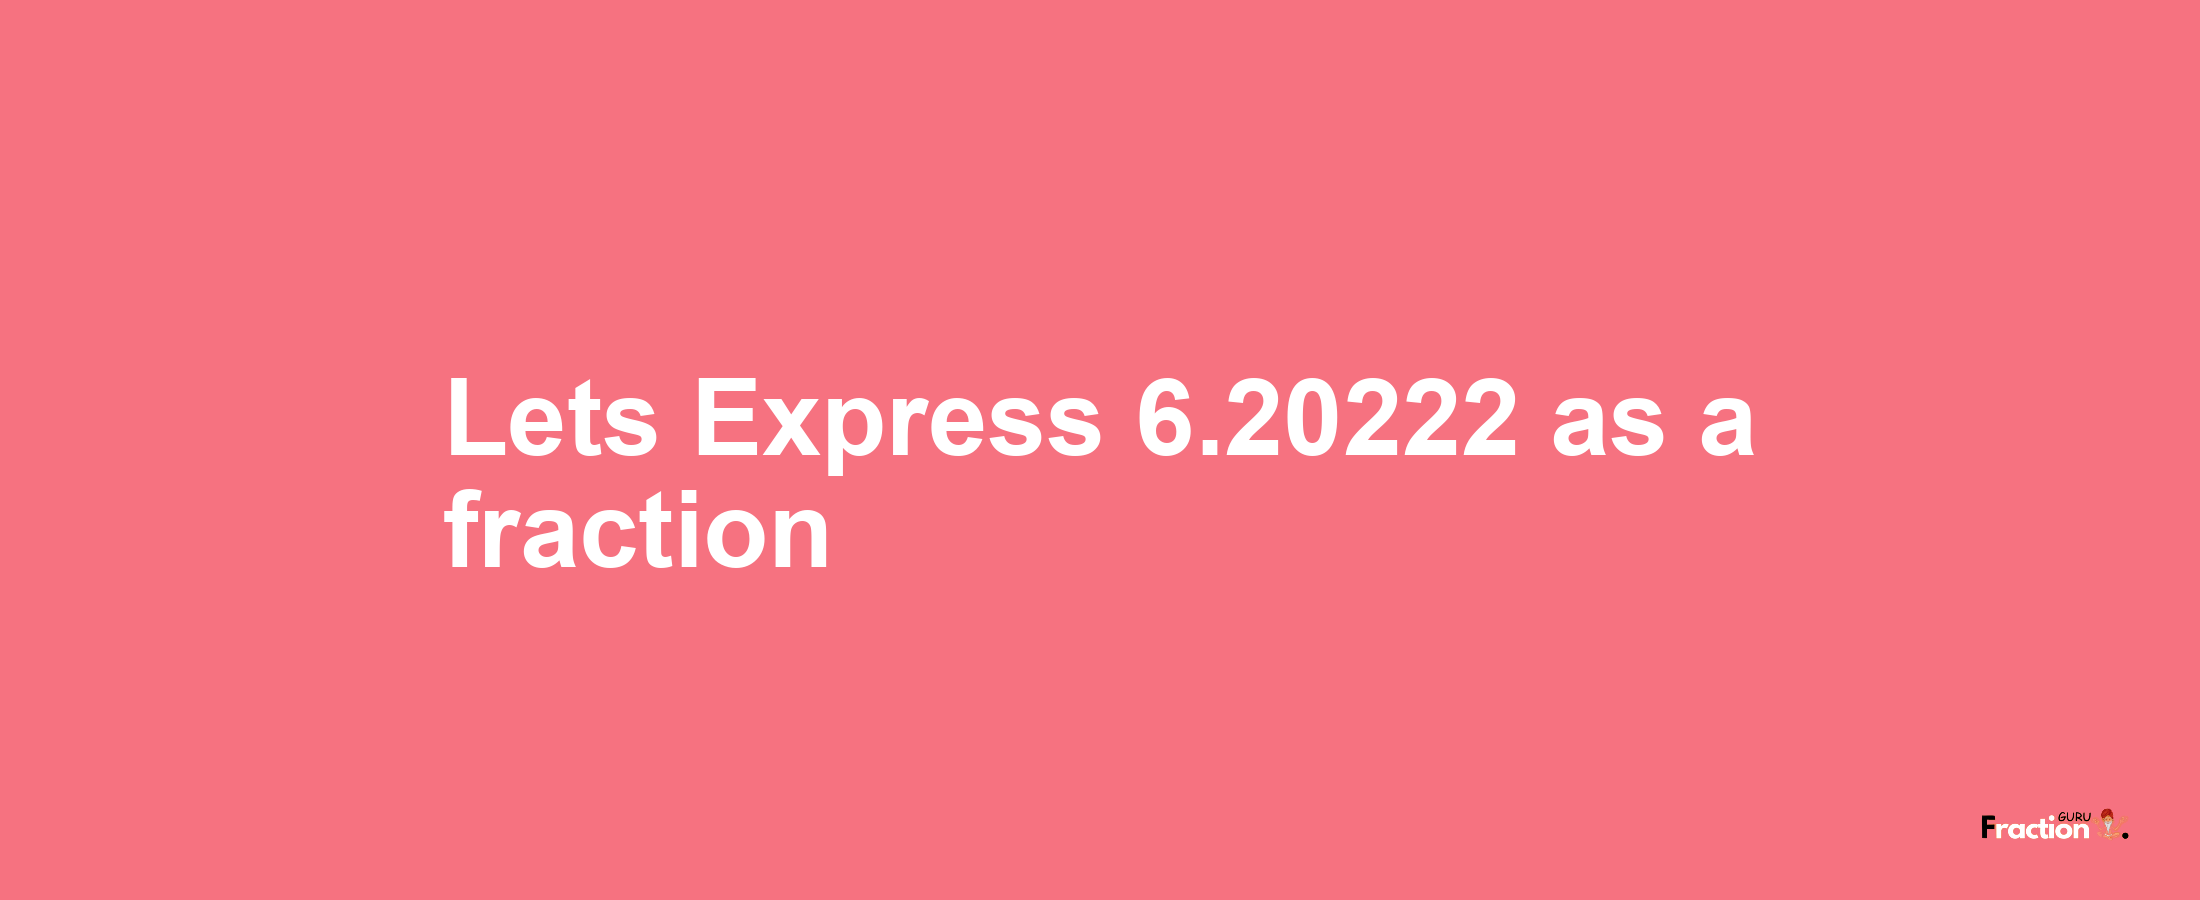 Lets Express 6.20222 as afraction